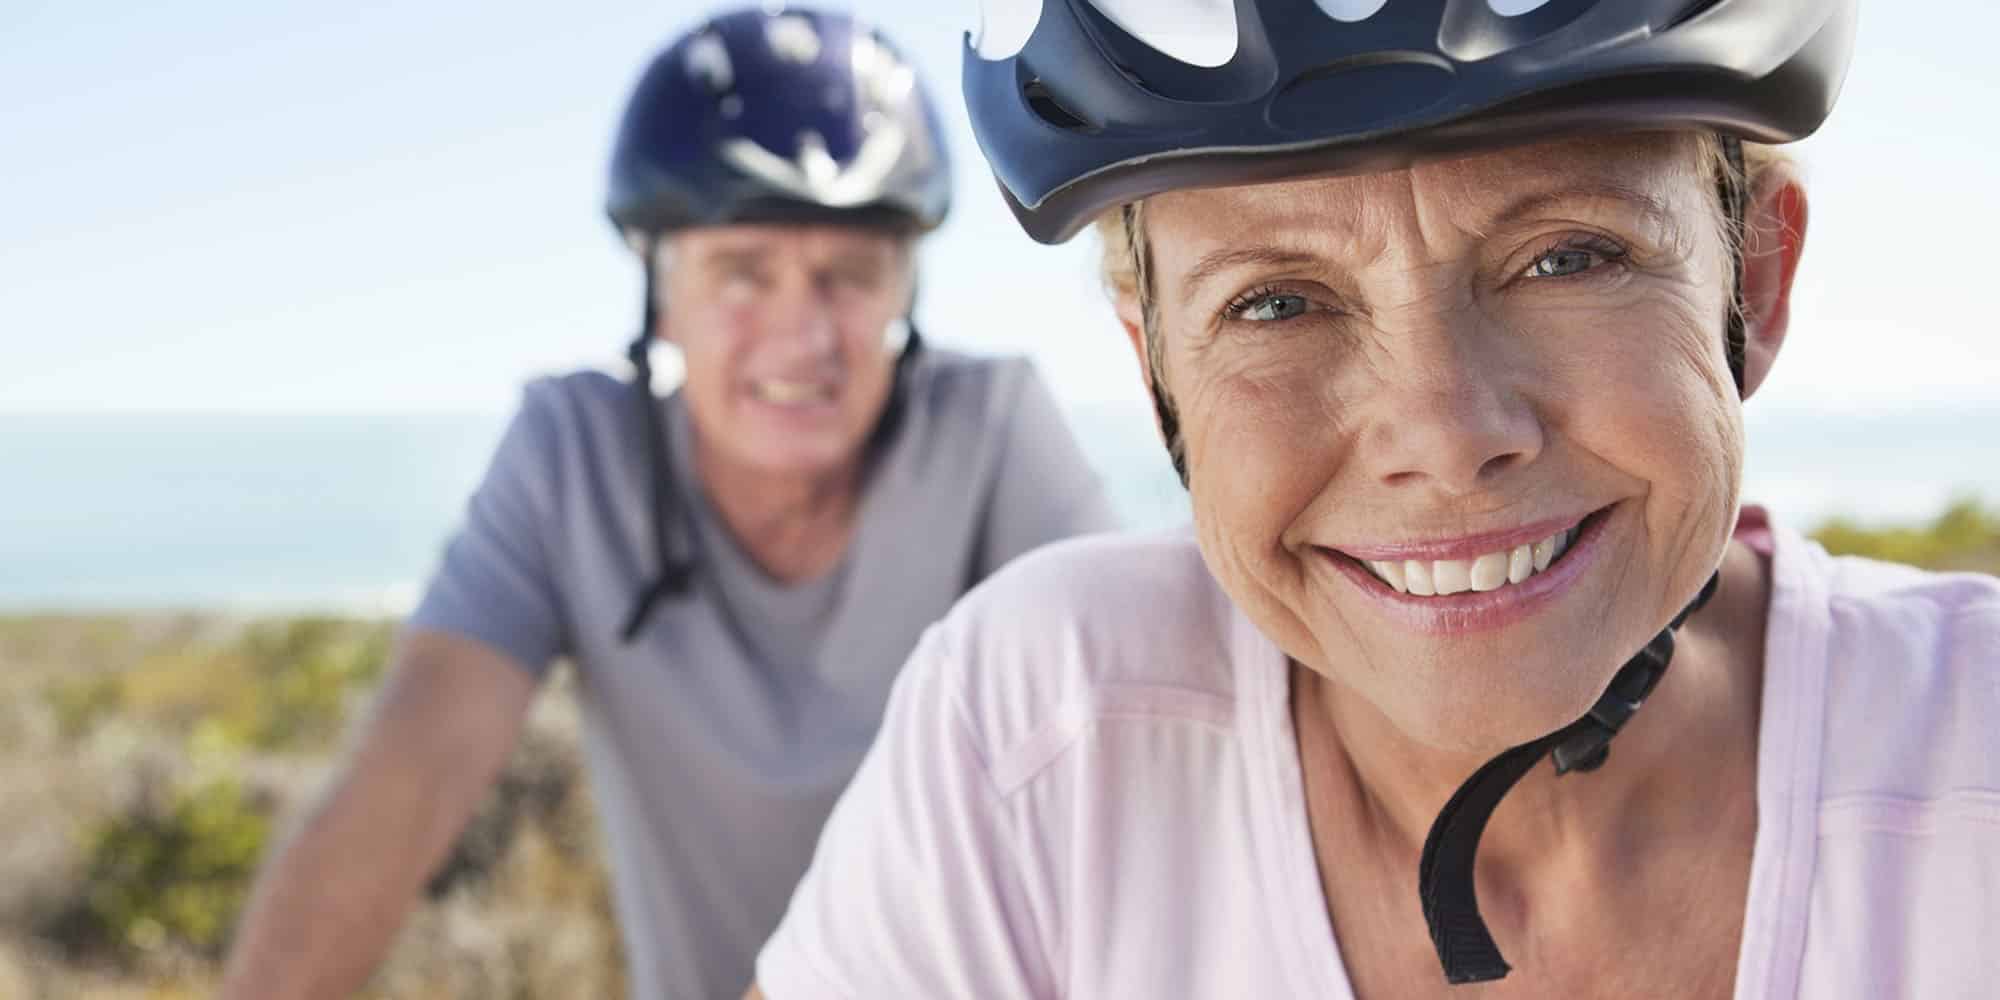 Denago Portrait of mature woman in sports helmet smiling with man in background